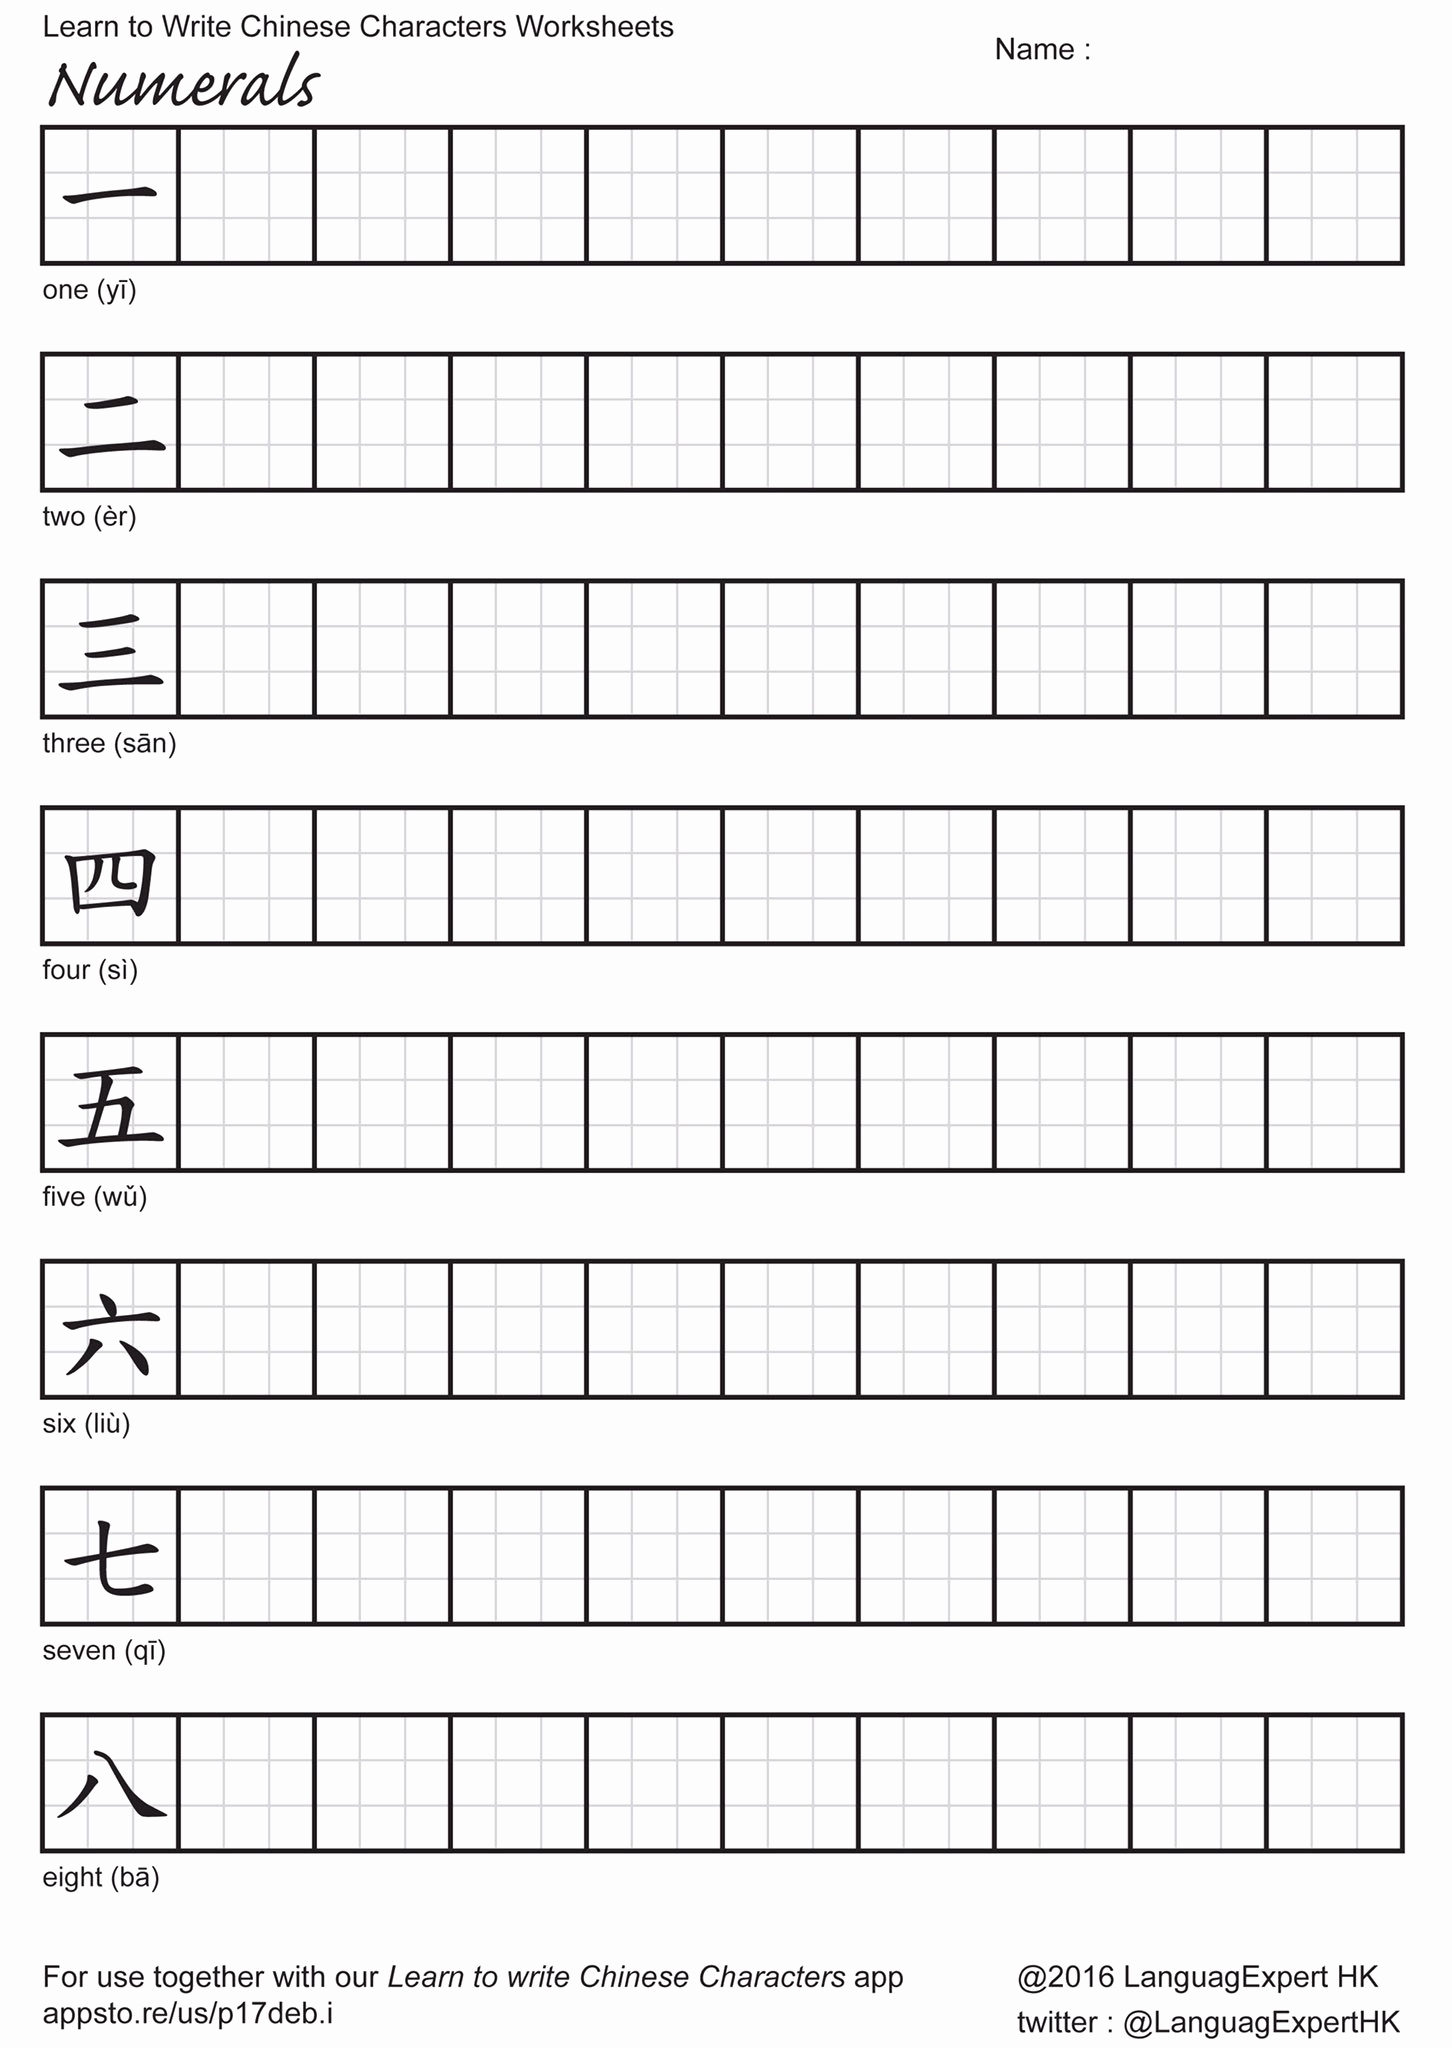 Learning Chinese Worksheets Luxury Learntowritechinese On Twitter &quot;learn to Write Chinese